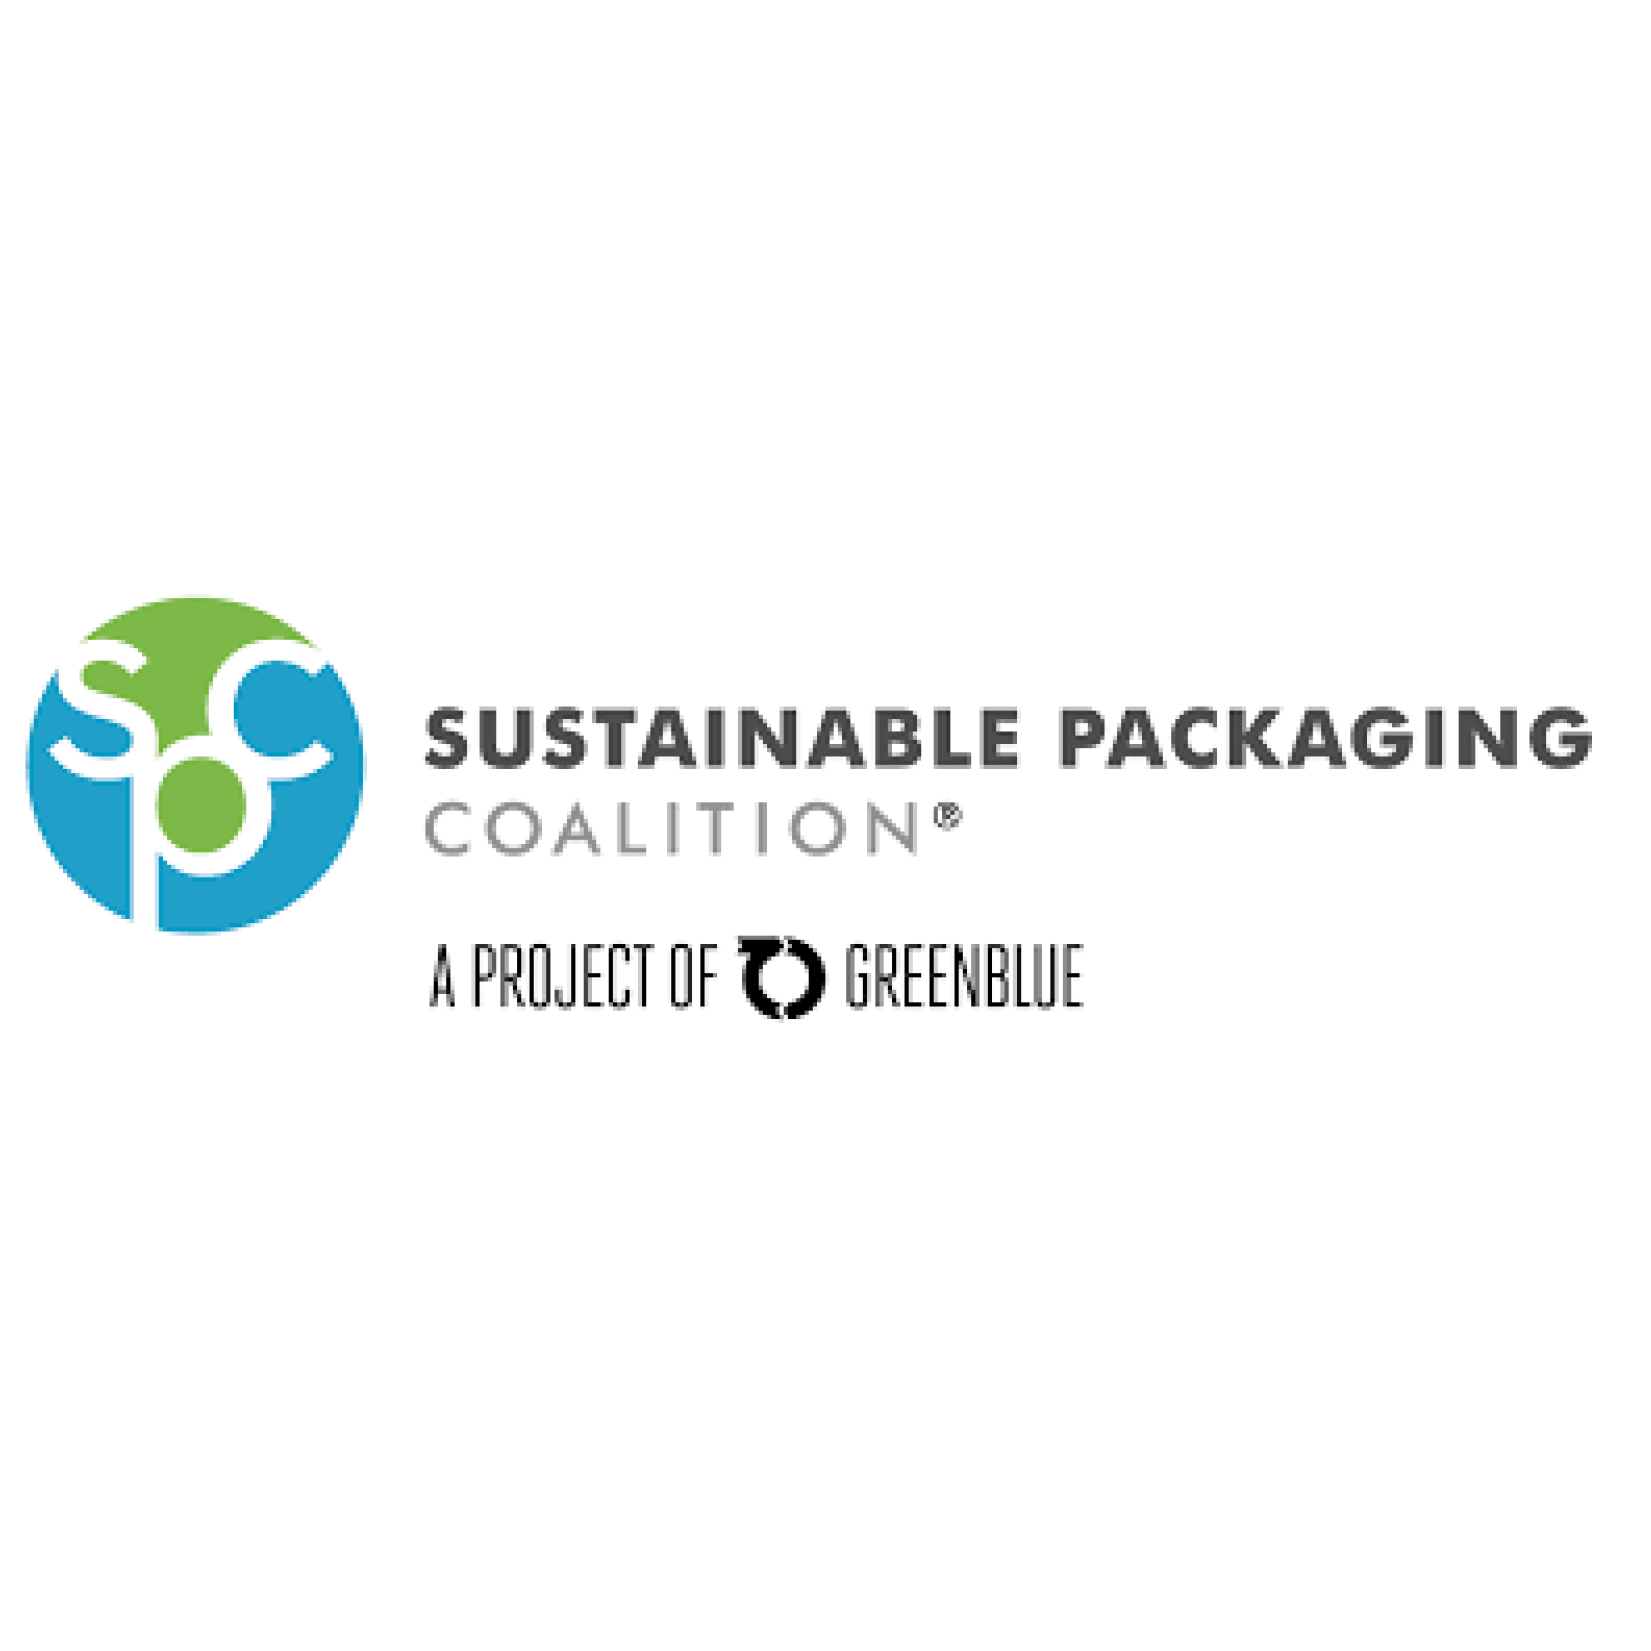 Sustainable packaging coalition logo